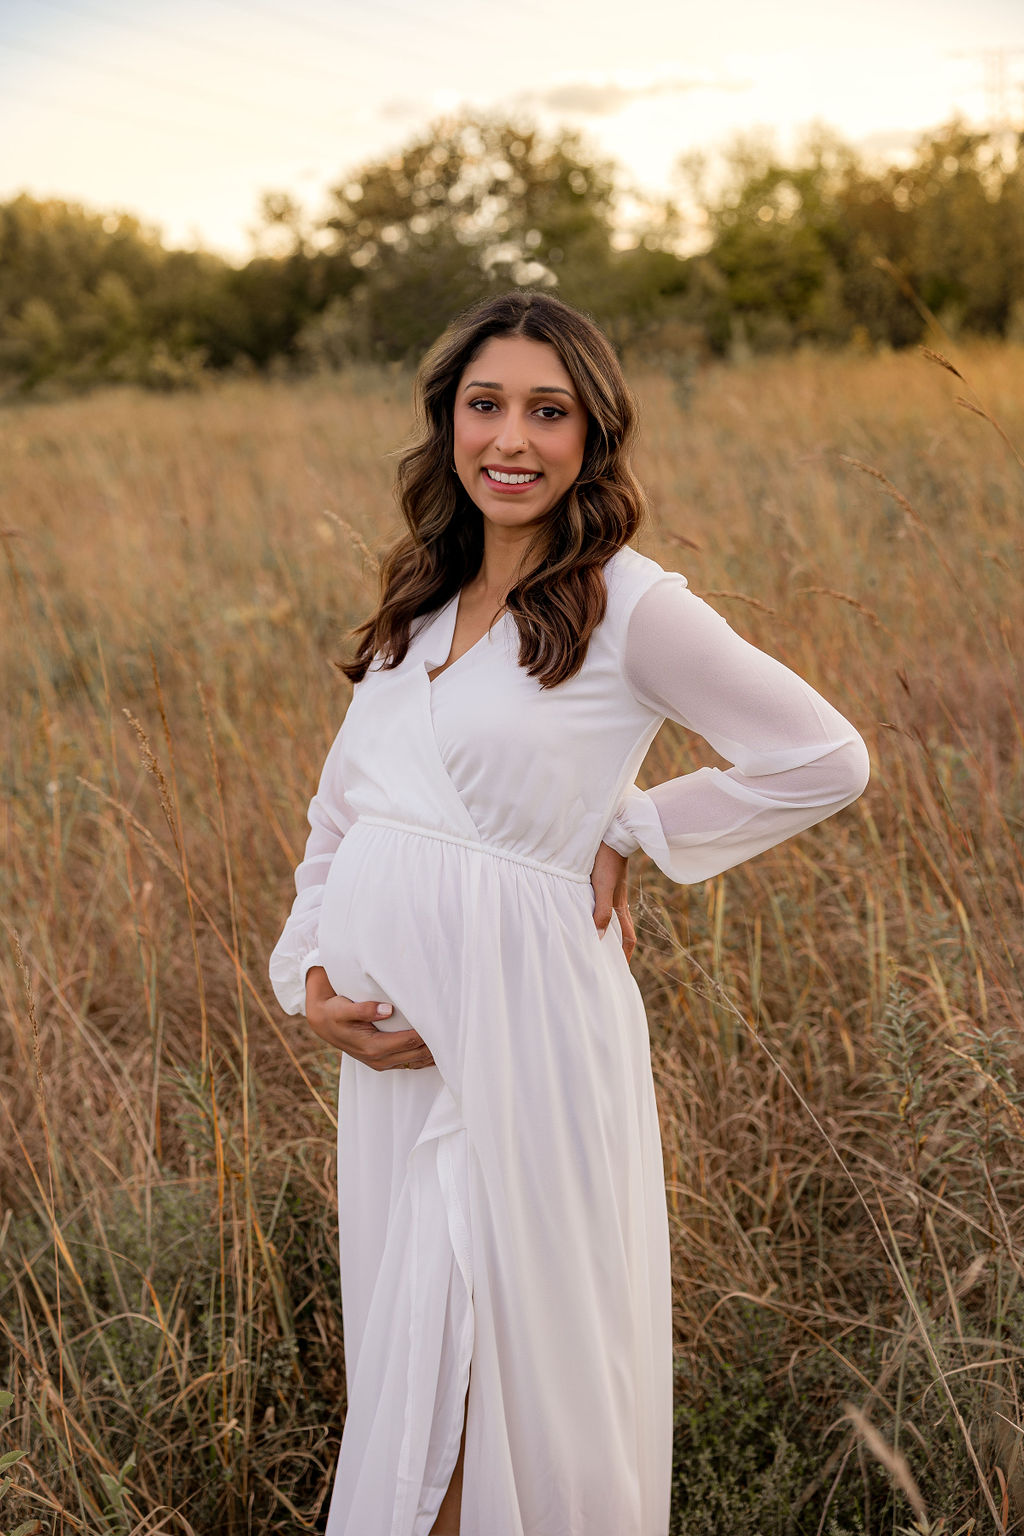 A mom to be in a white maternity gown holds her bump while smiling in a field of tall grass